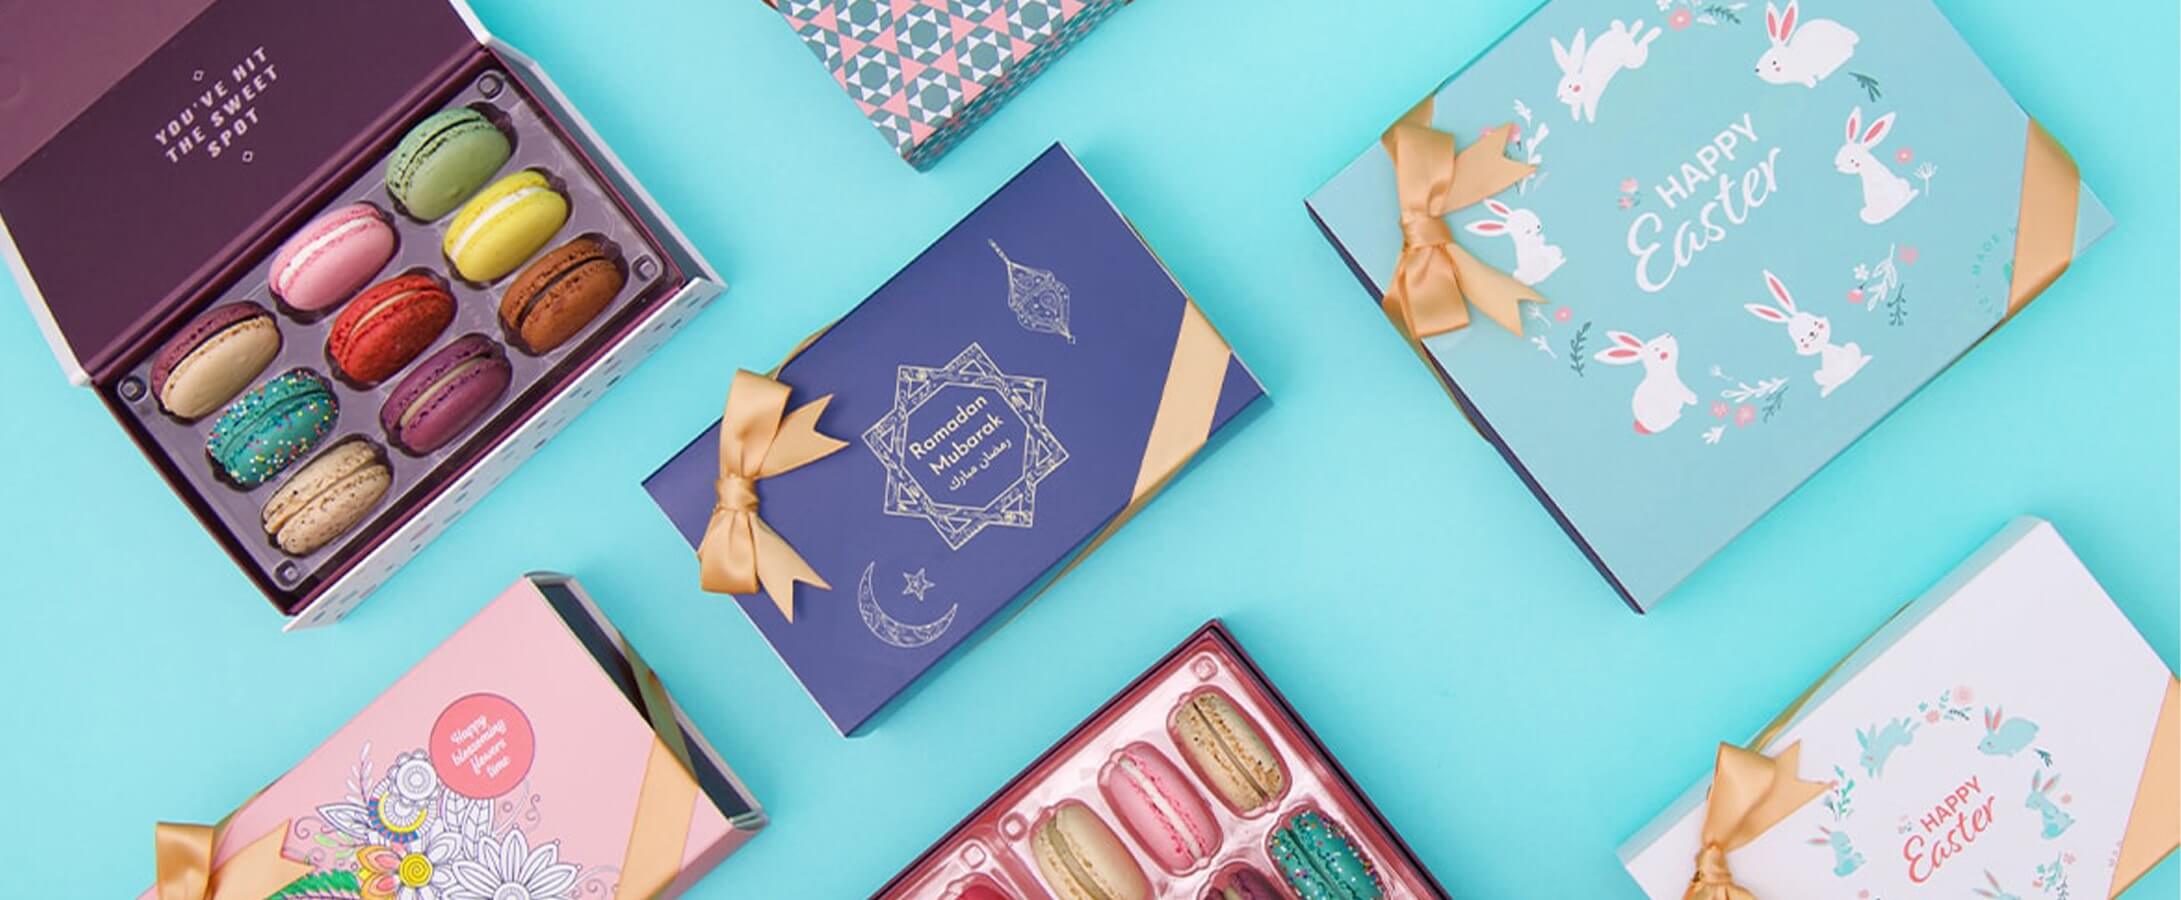 Two Woops! boxes full of assorted macarons are surrounded by macaron boxes with Easter, Blossoming Colors, Passover, and Ramadan & Eid sleeves.